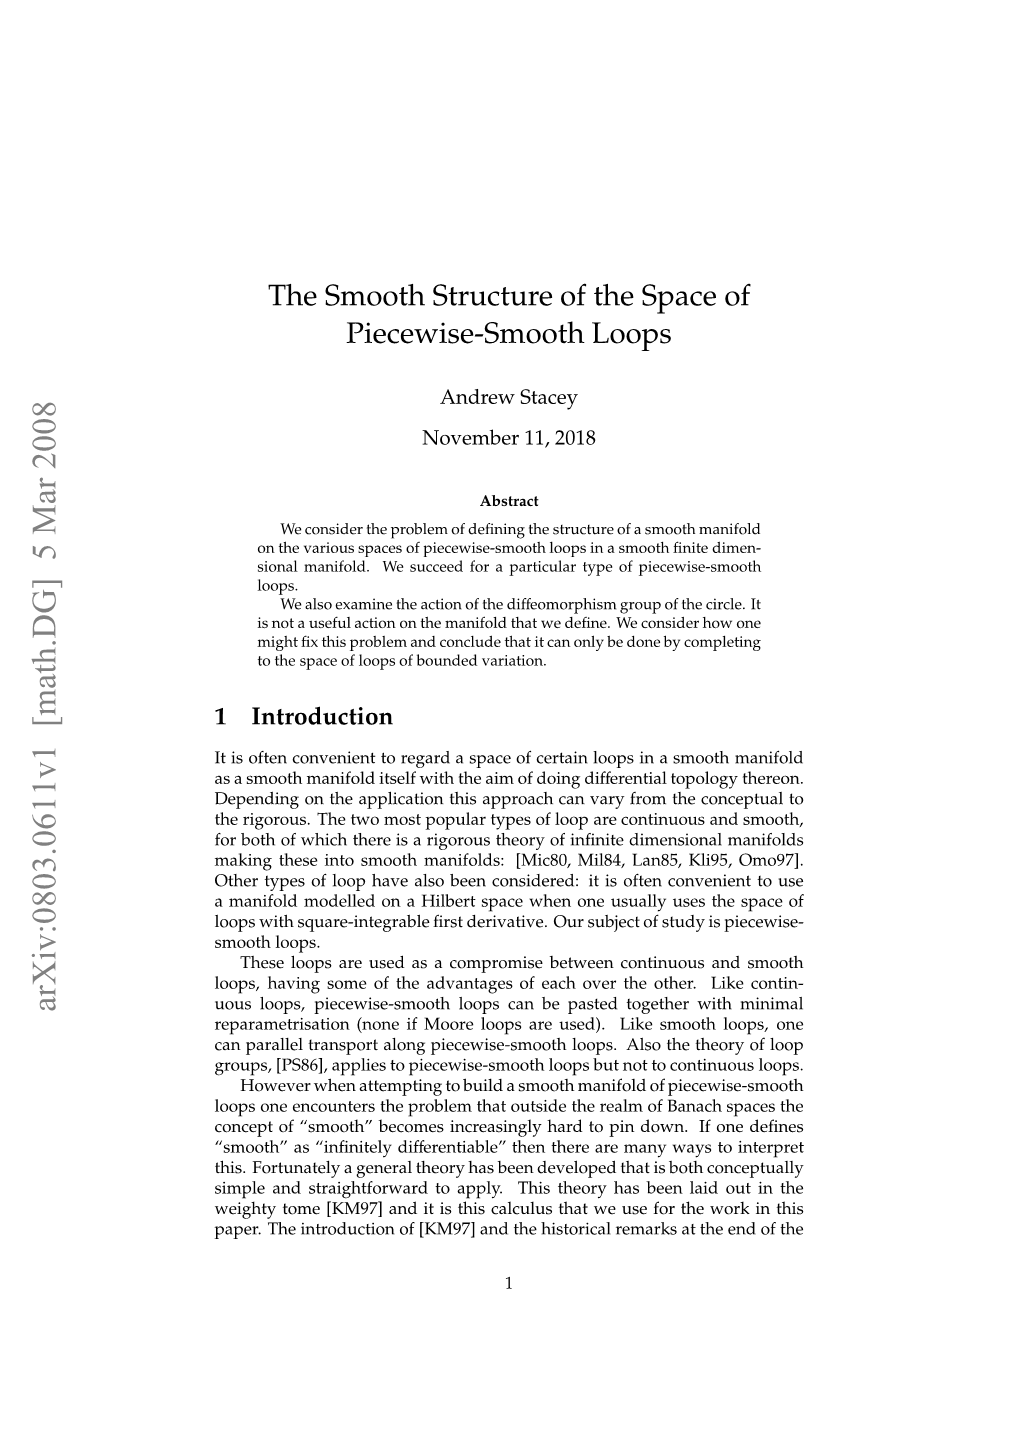 The Smooth Structure of the Space of Piecewise-Smooth Loops